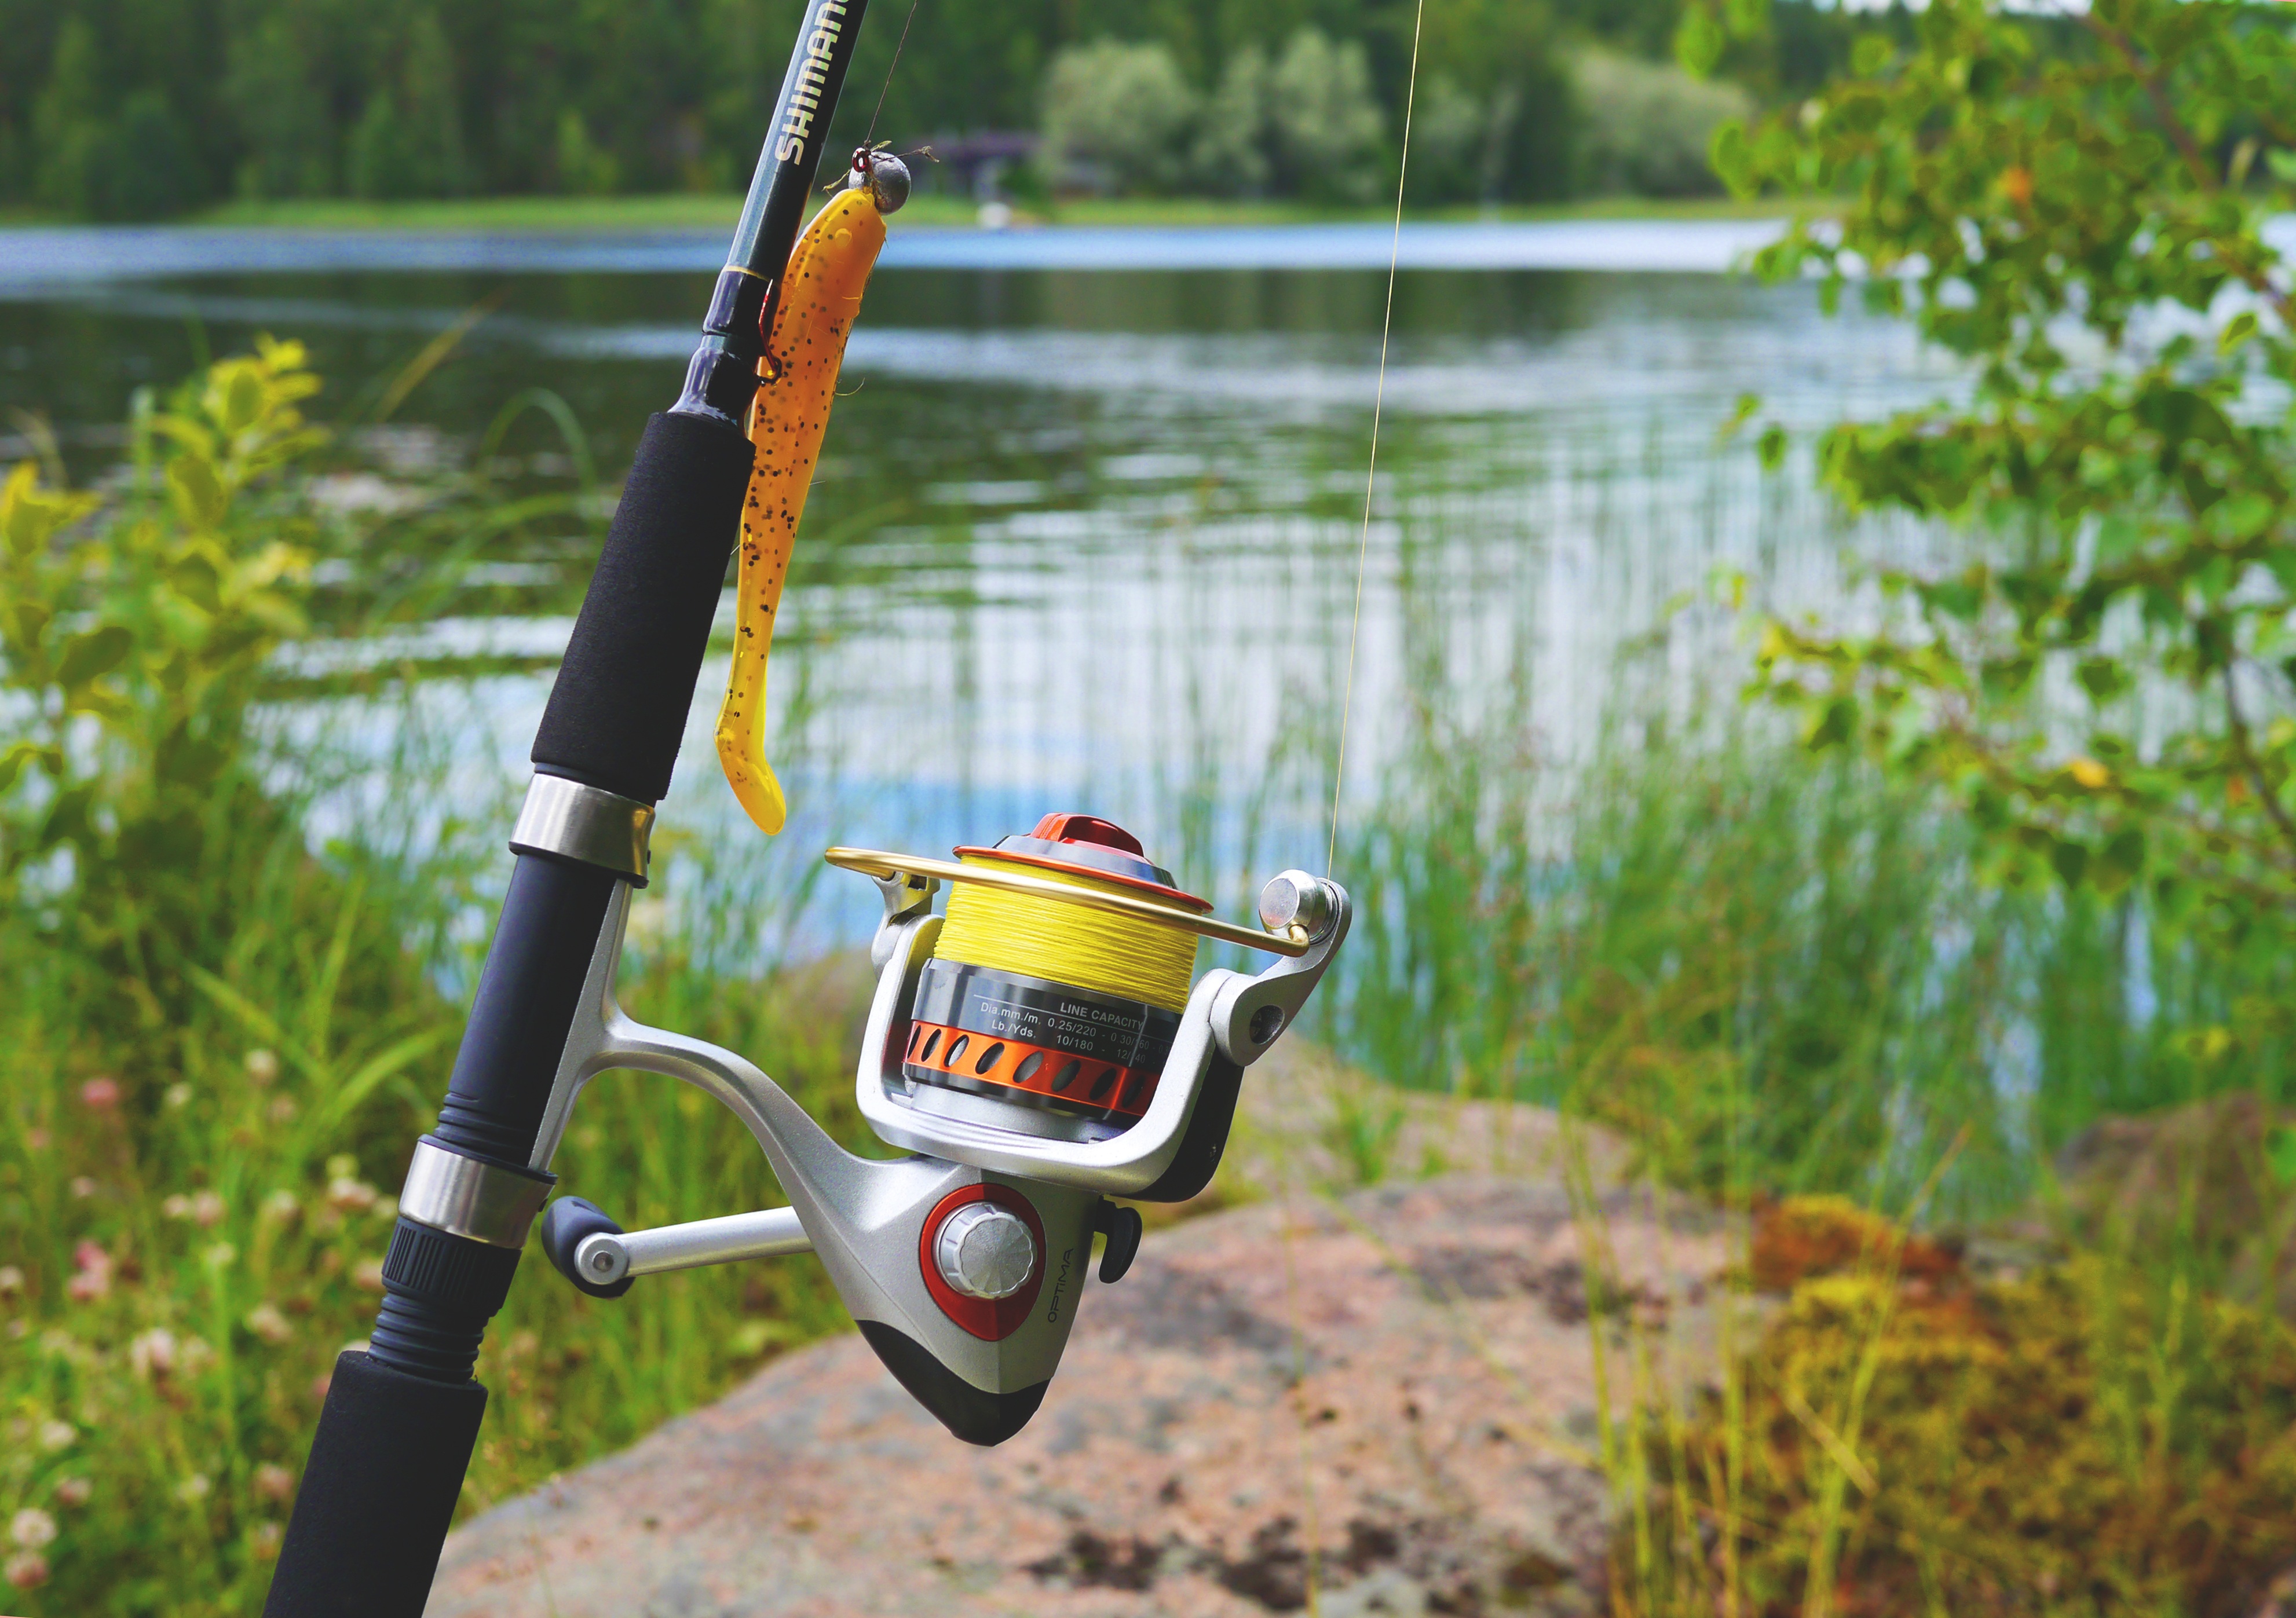 Fly fishing rod and reel by Snufkin